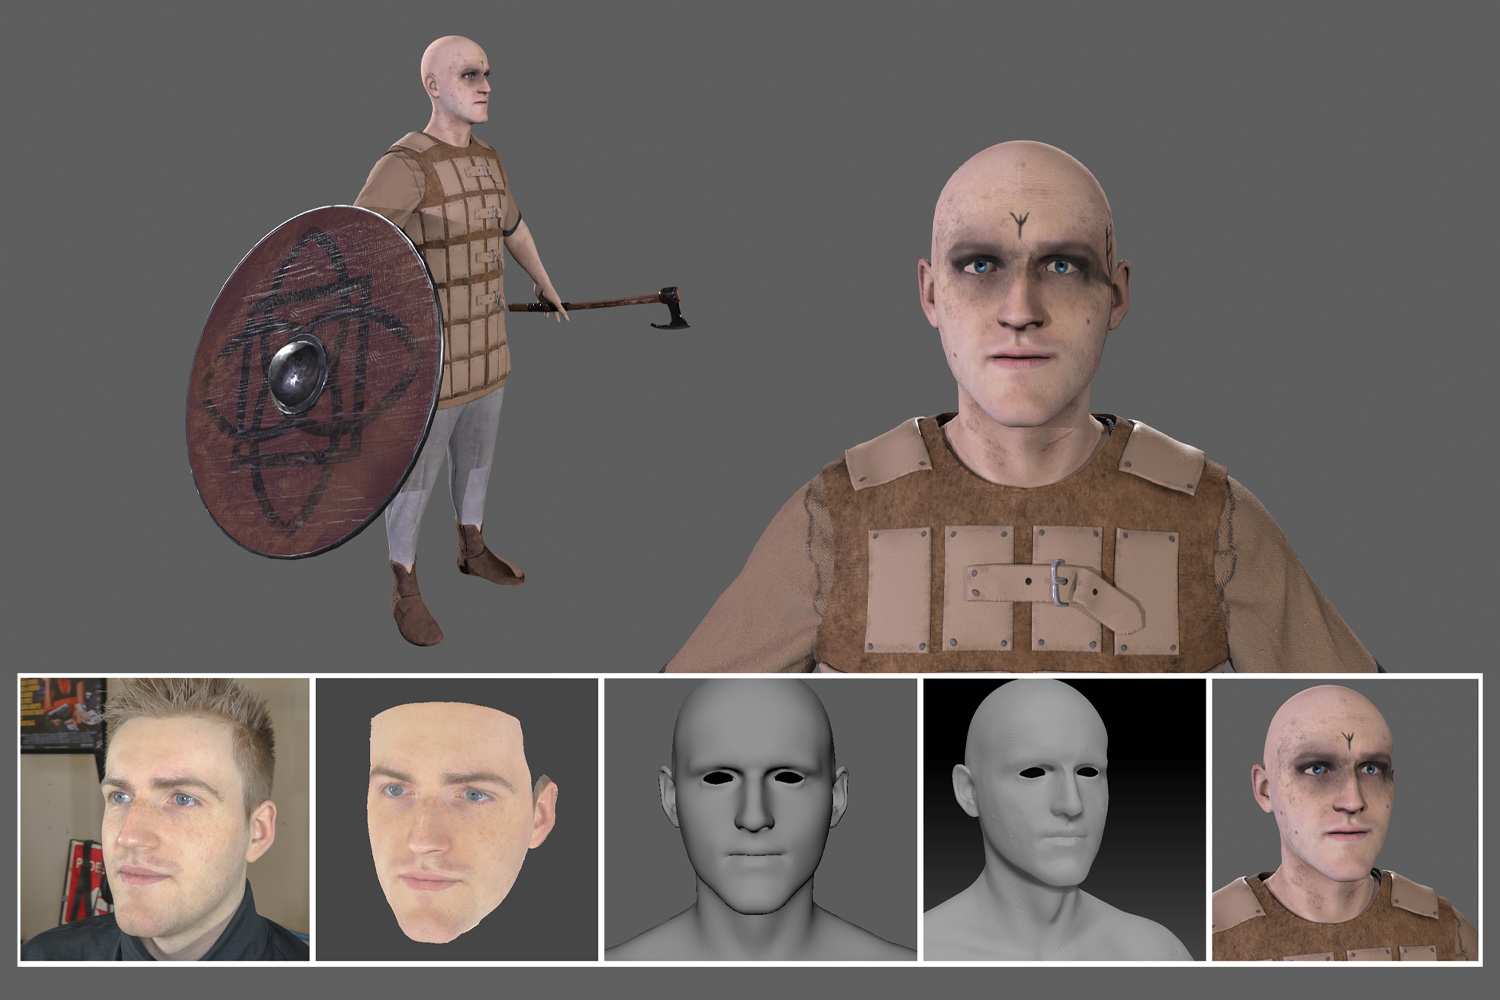 "Conquering the Uncanny Valley Using Photogrammetry" is a 2022 Digital Graduate Show project by Stuart McQuade, a Computer Arts student at Abertay University.